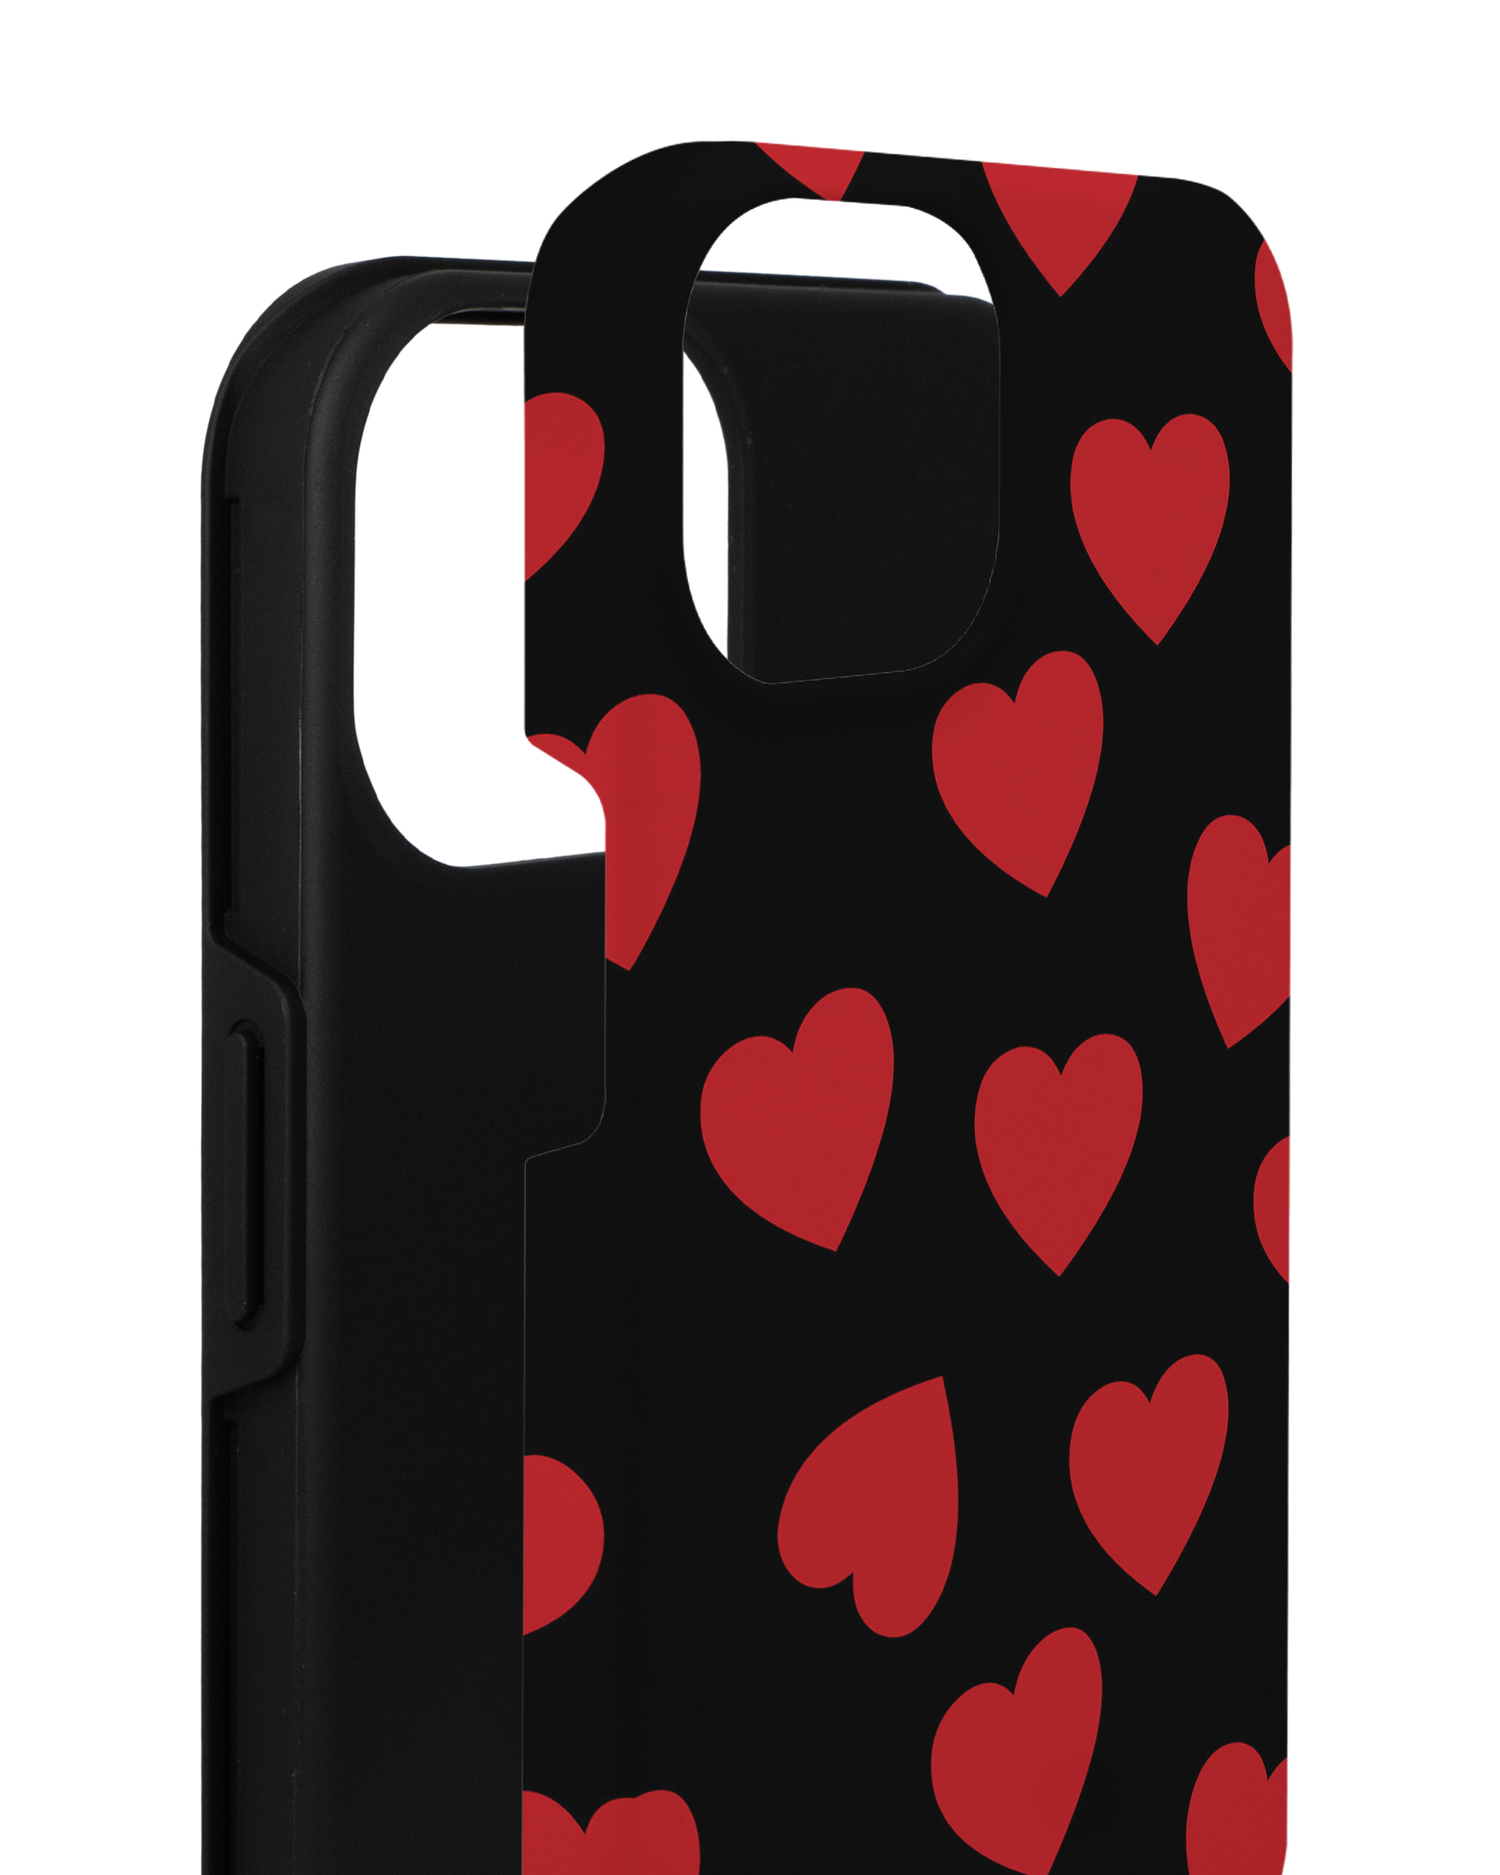 Repeating Hearts Premium Phone for Apple iPhone 14 consisting of 2 parts